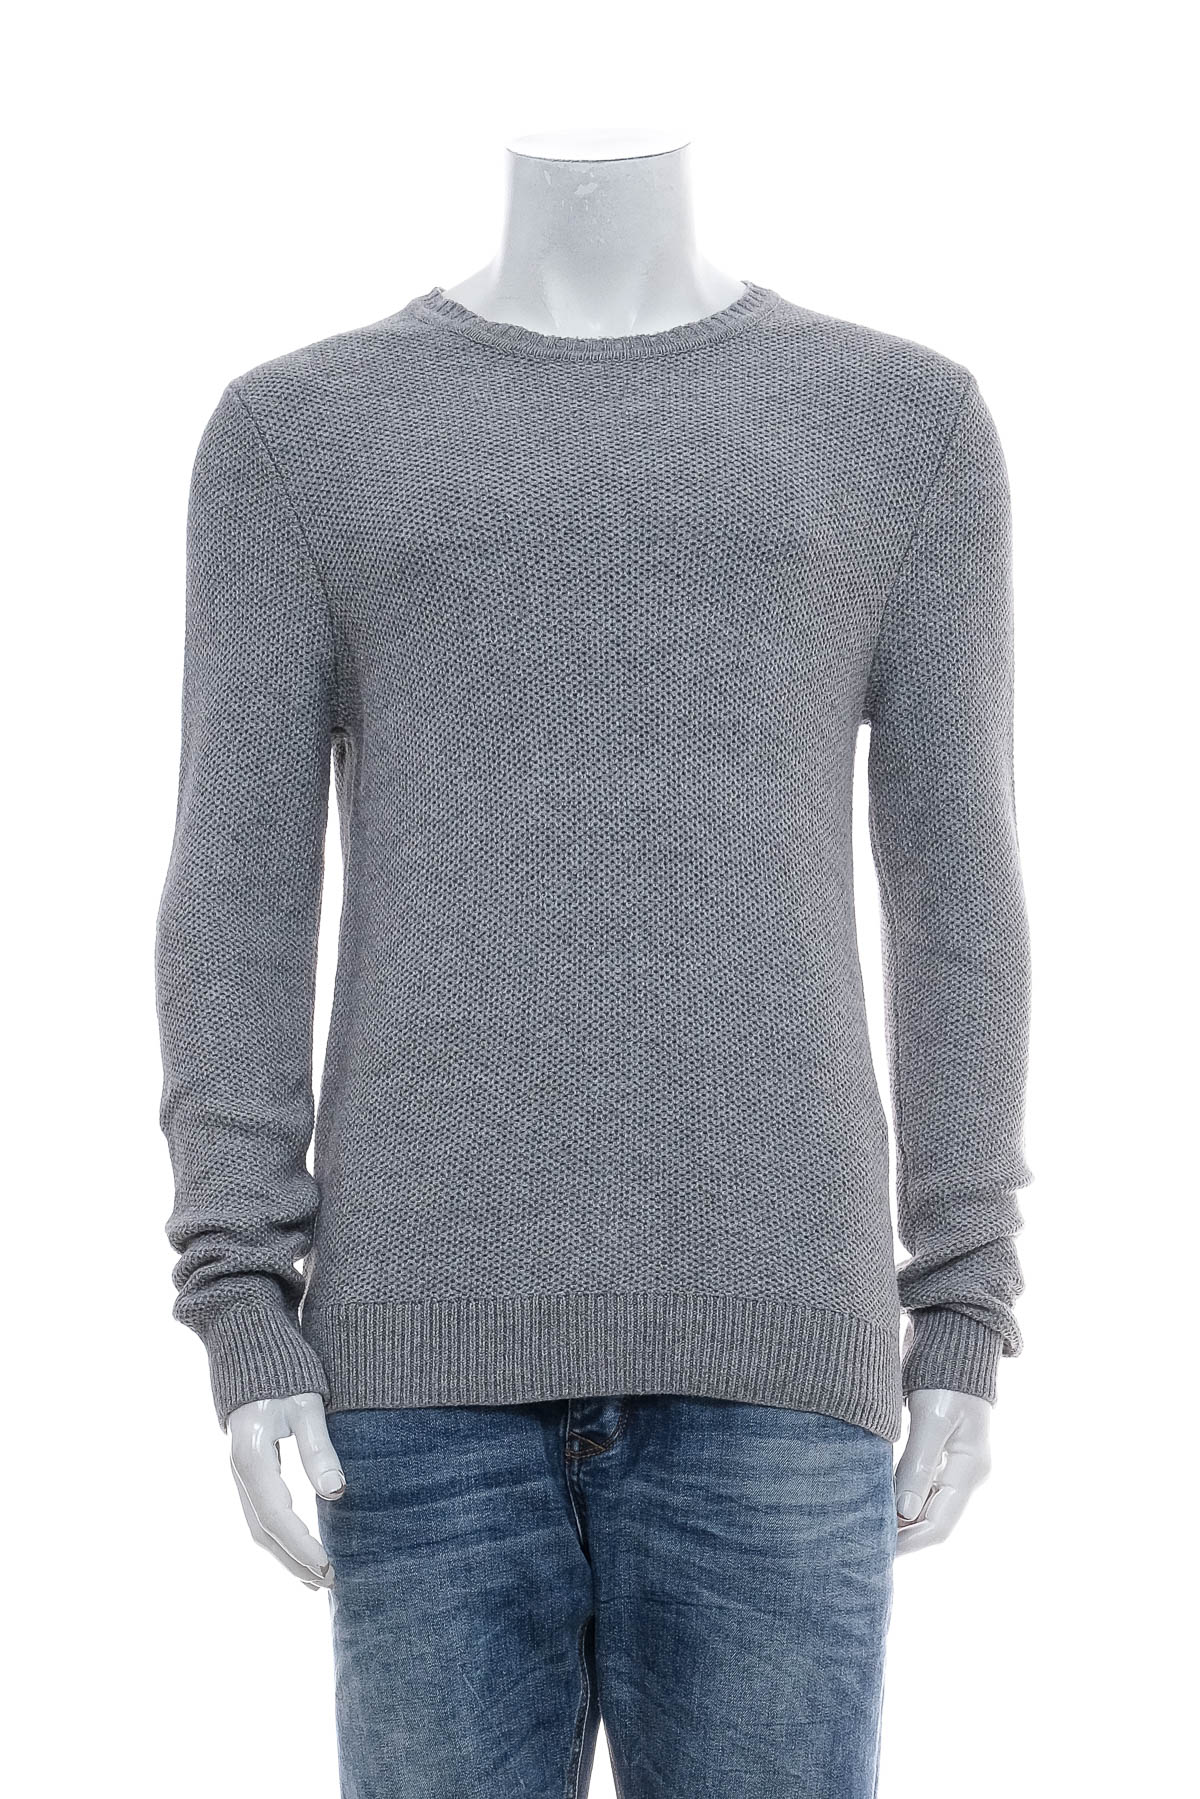 Men's sweater - Just Jeans - 0